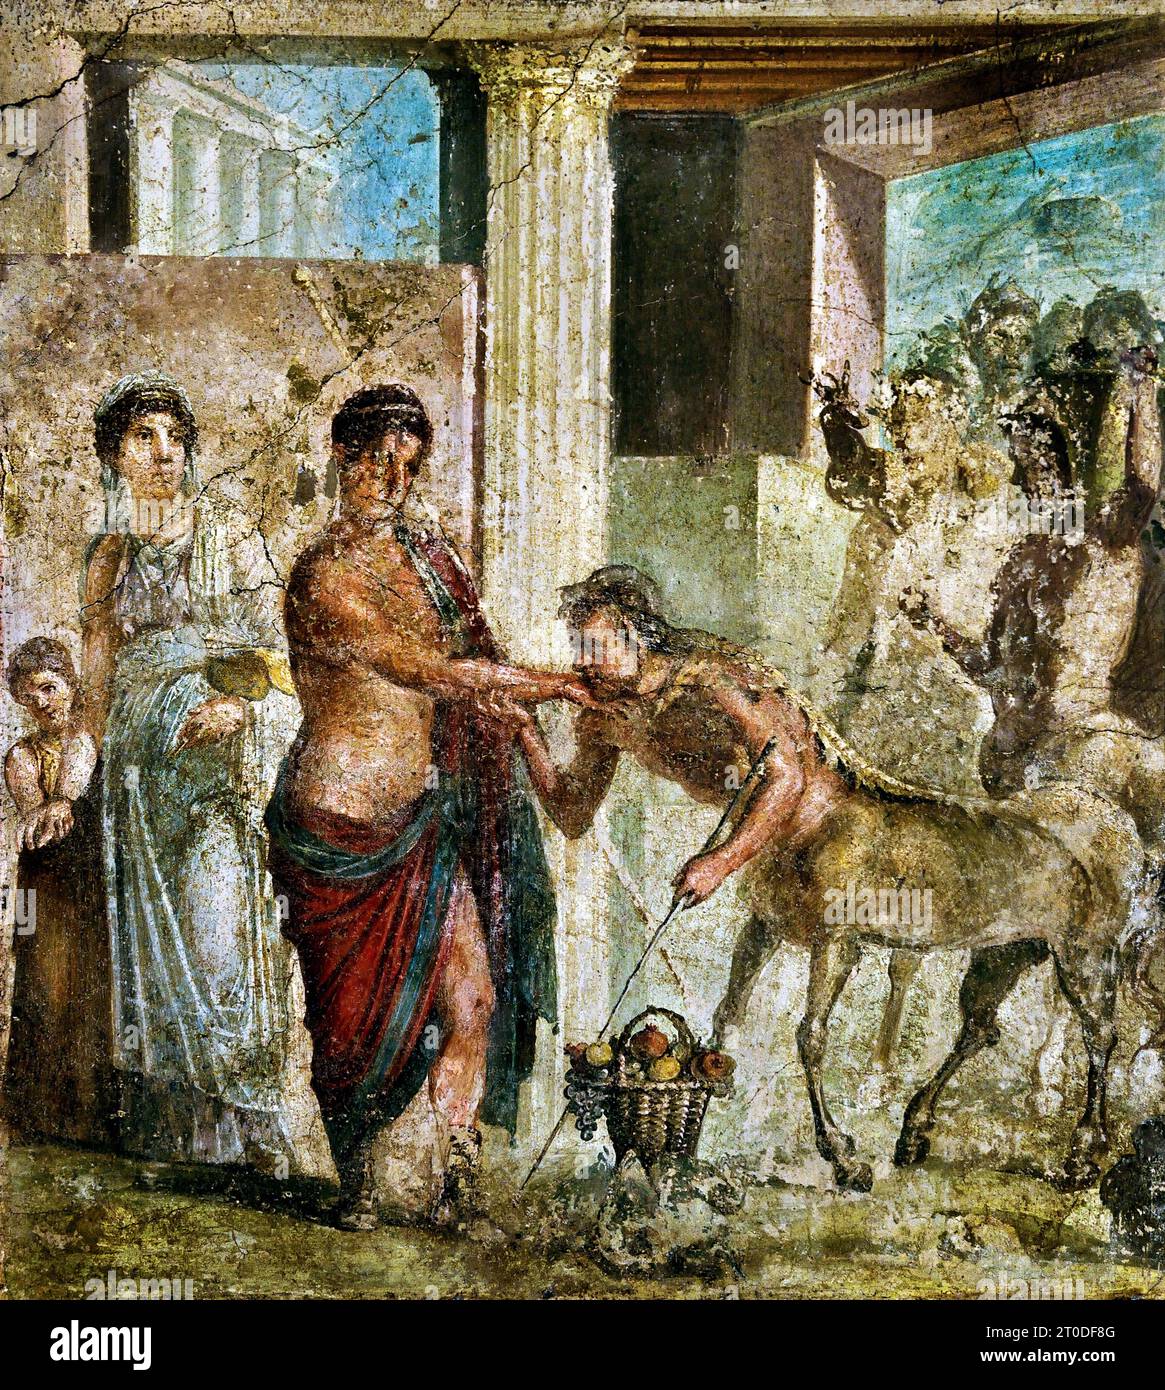 Pirithous with Hippodamia at a wedding where centaurs kidnapped the Lapith women, House of Gavius Rufus VII, Fresco Pompeii Roman City is located near Naples in the Campania region of Italy. Pompeii was buried under 4-6 m of volcanic ash and pumice in the eruption of Mount Vesuvius in AD 79. Italy Stock Photo